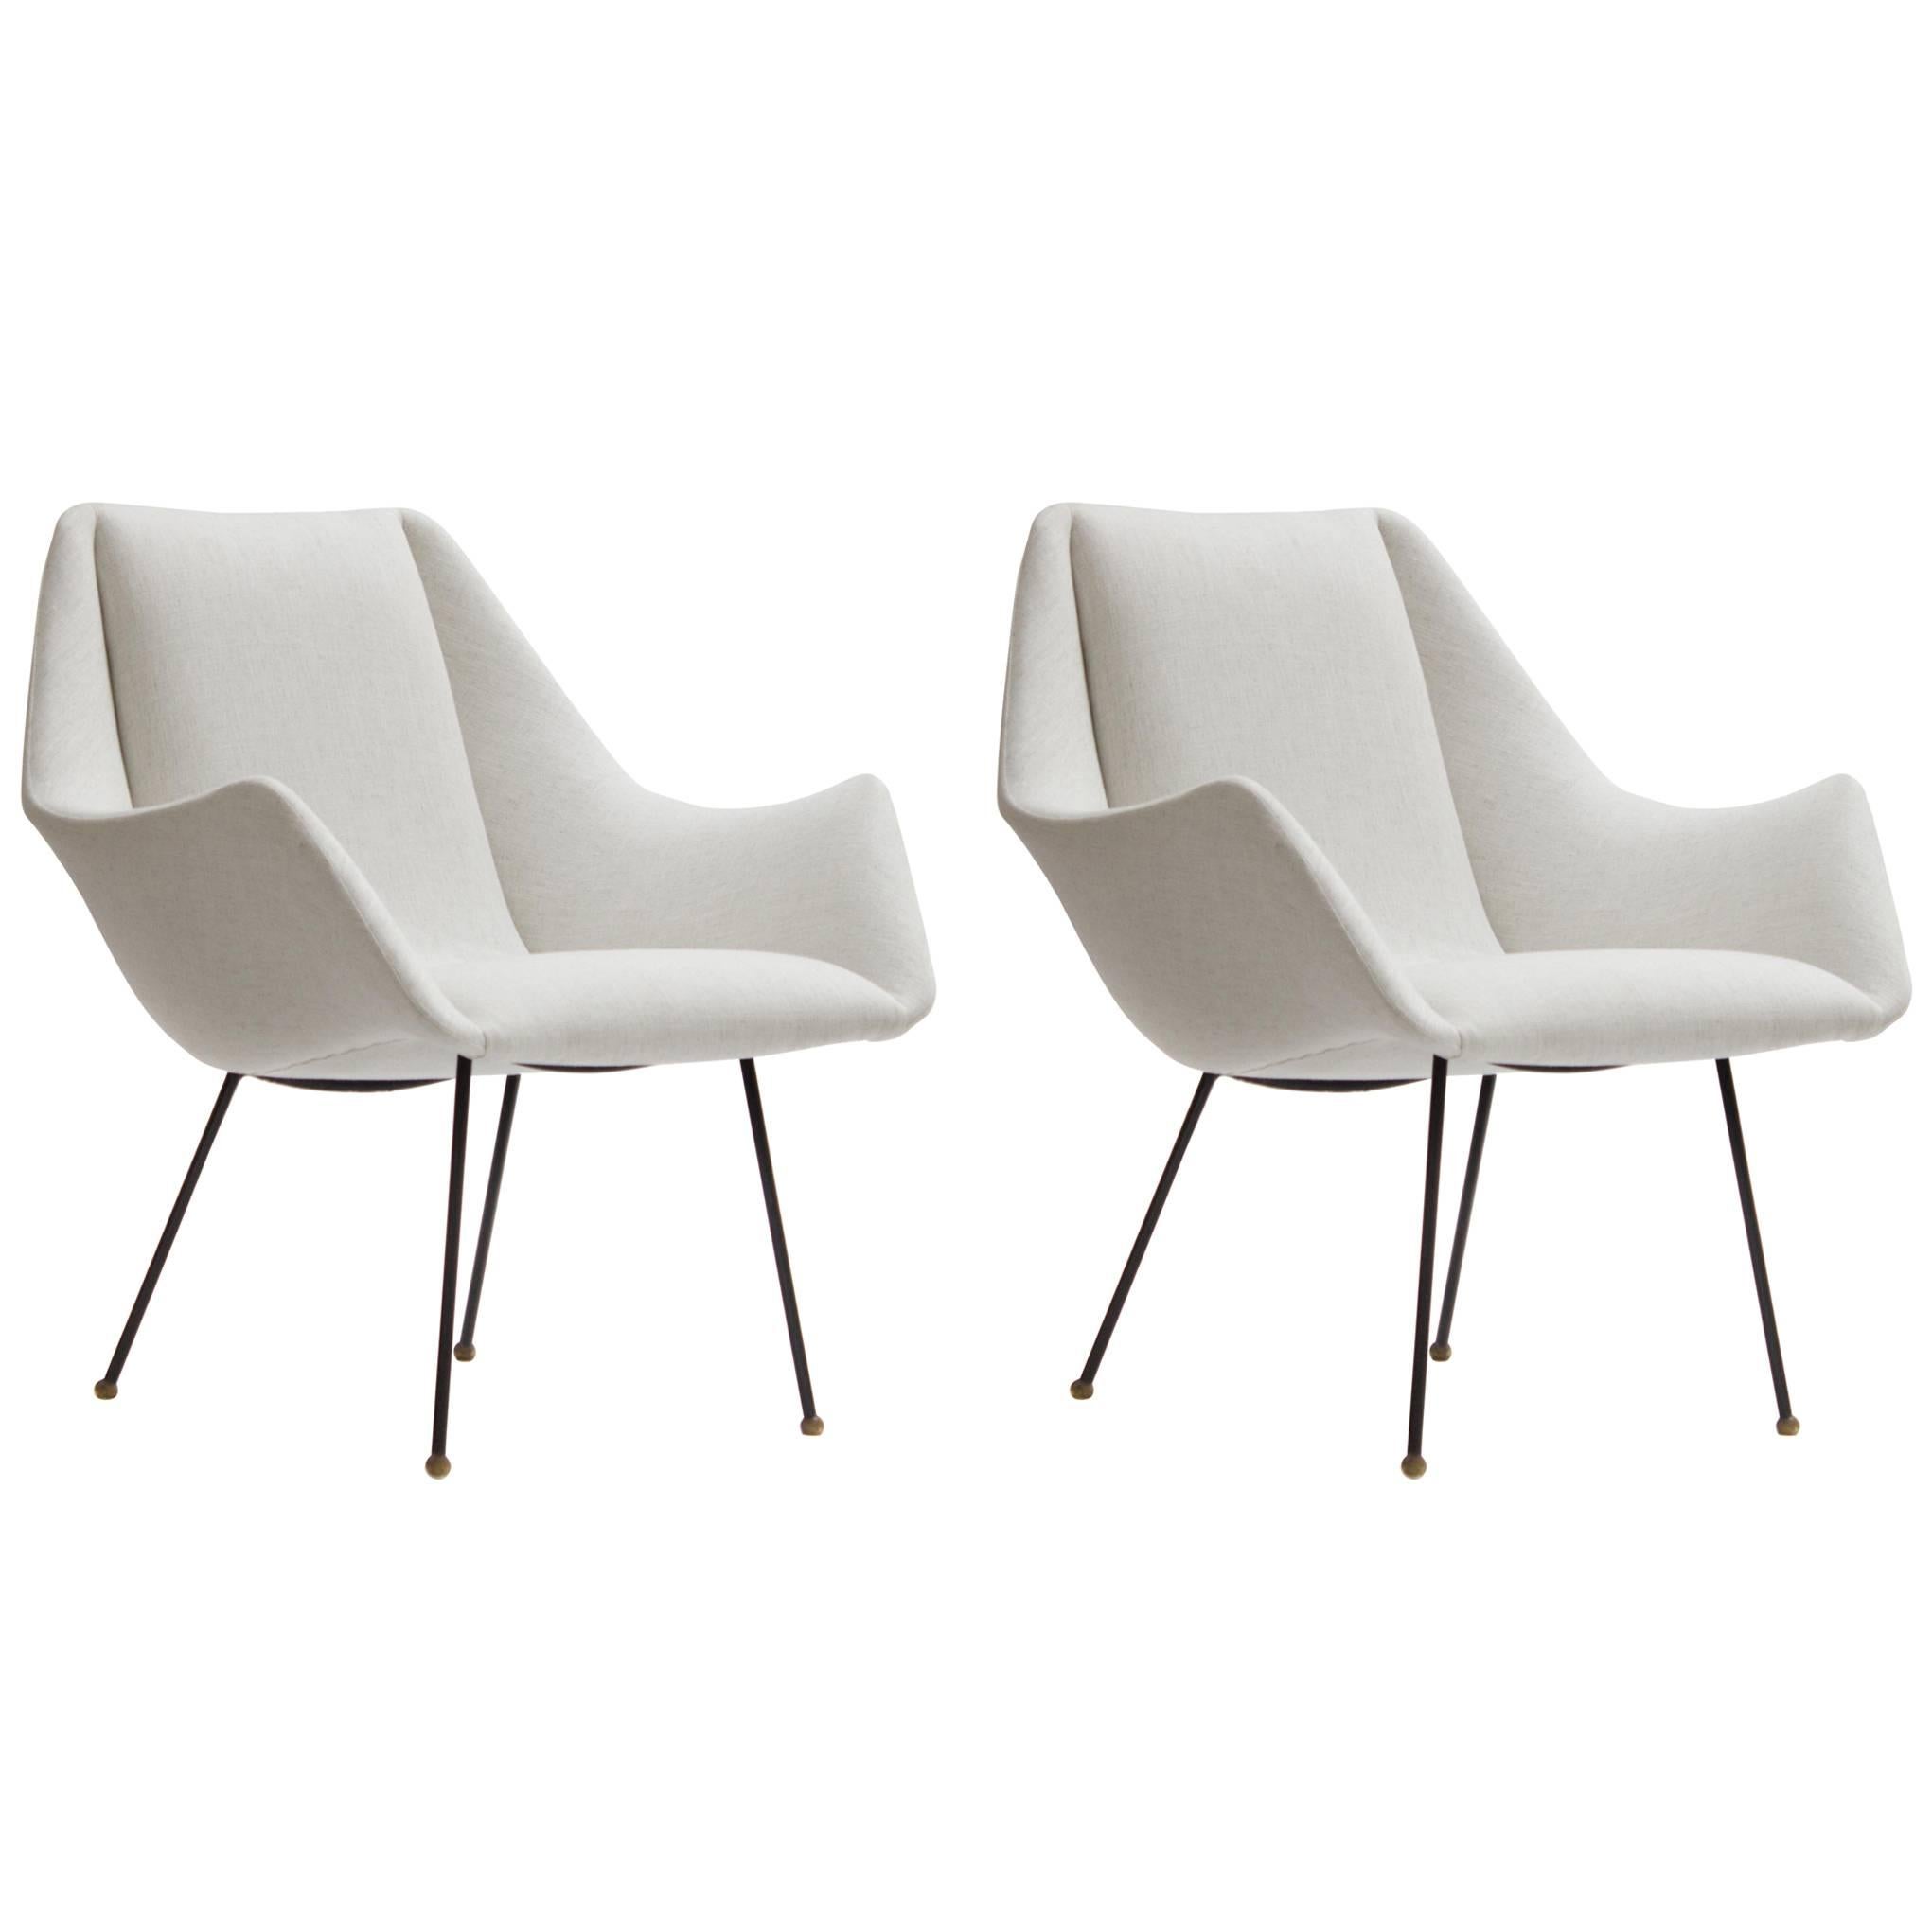 Mid-Century Ivory Lounge Chairs by Carlo Hauner for Forma, Brazil, circa 1960